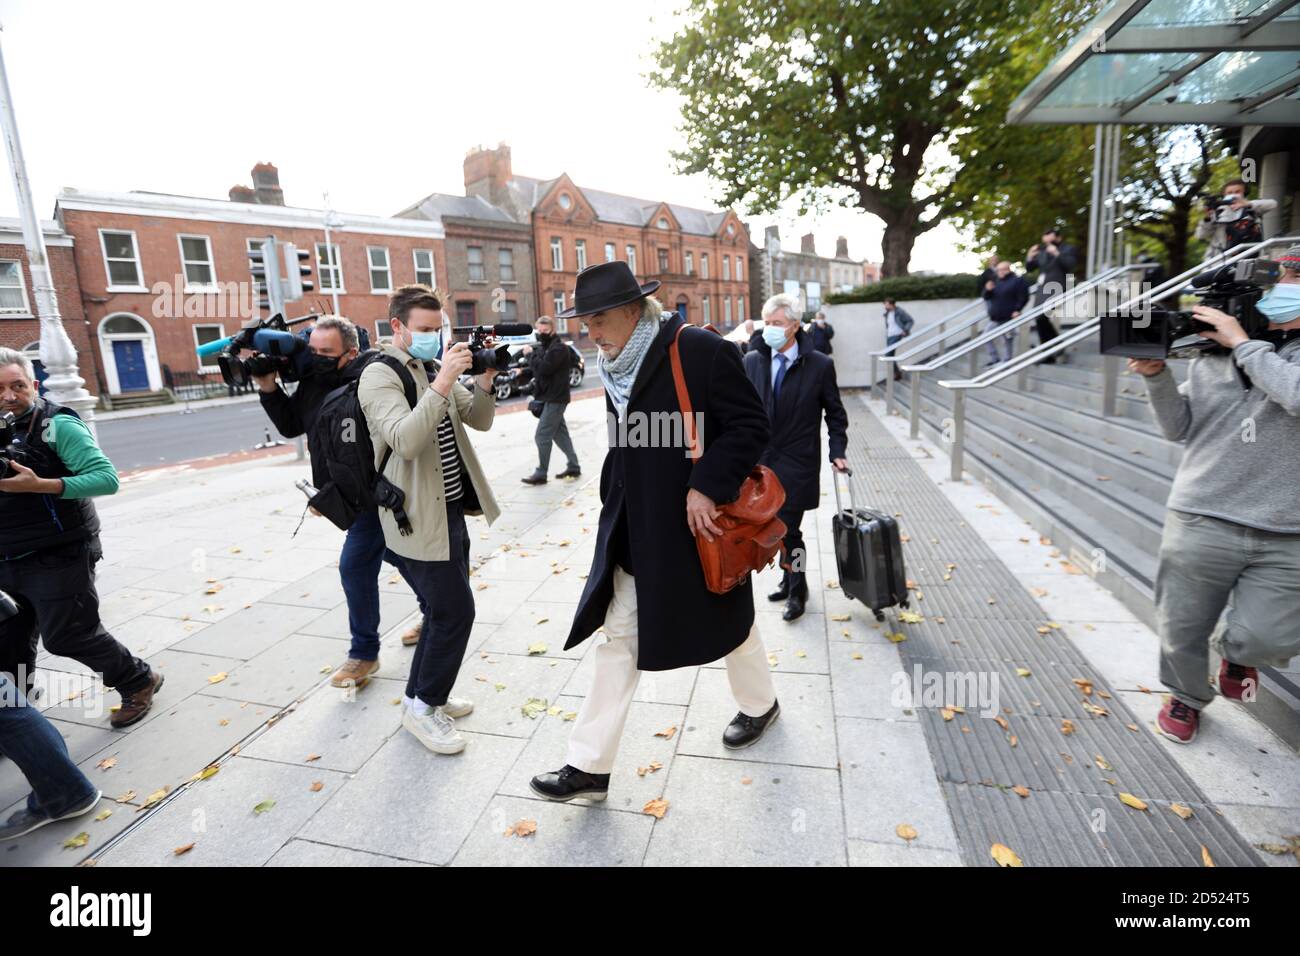 Dublin, Leinster, Ireland. 12/October/2020. Irish High Court refuses to extradite Ian Bailey to France for the murder of French citizen Sophie Toscan du Plantier in Ireland in 1996. Photo shows Ian Bailey leaving the court after the decision. Mr Bailey has already been found guilty of the murder, in his absence, by a French Court. Mr Bailey has alway denied the murder. Photo: Sasko Lazarov/RollingNews.ie Credit: RollingNews.ie/Alamy Live News Stock Photo